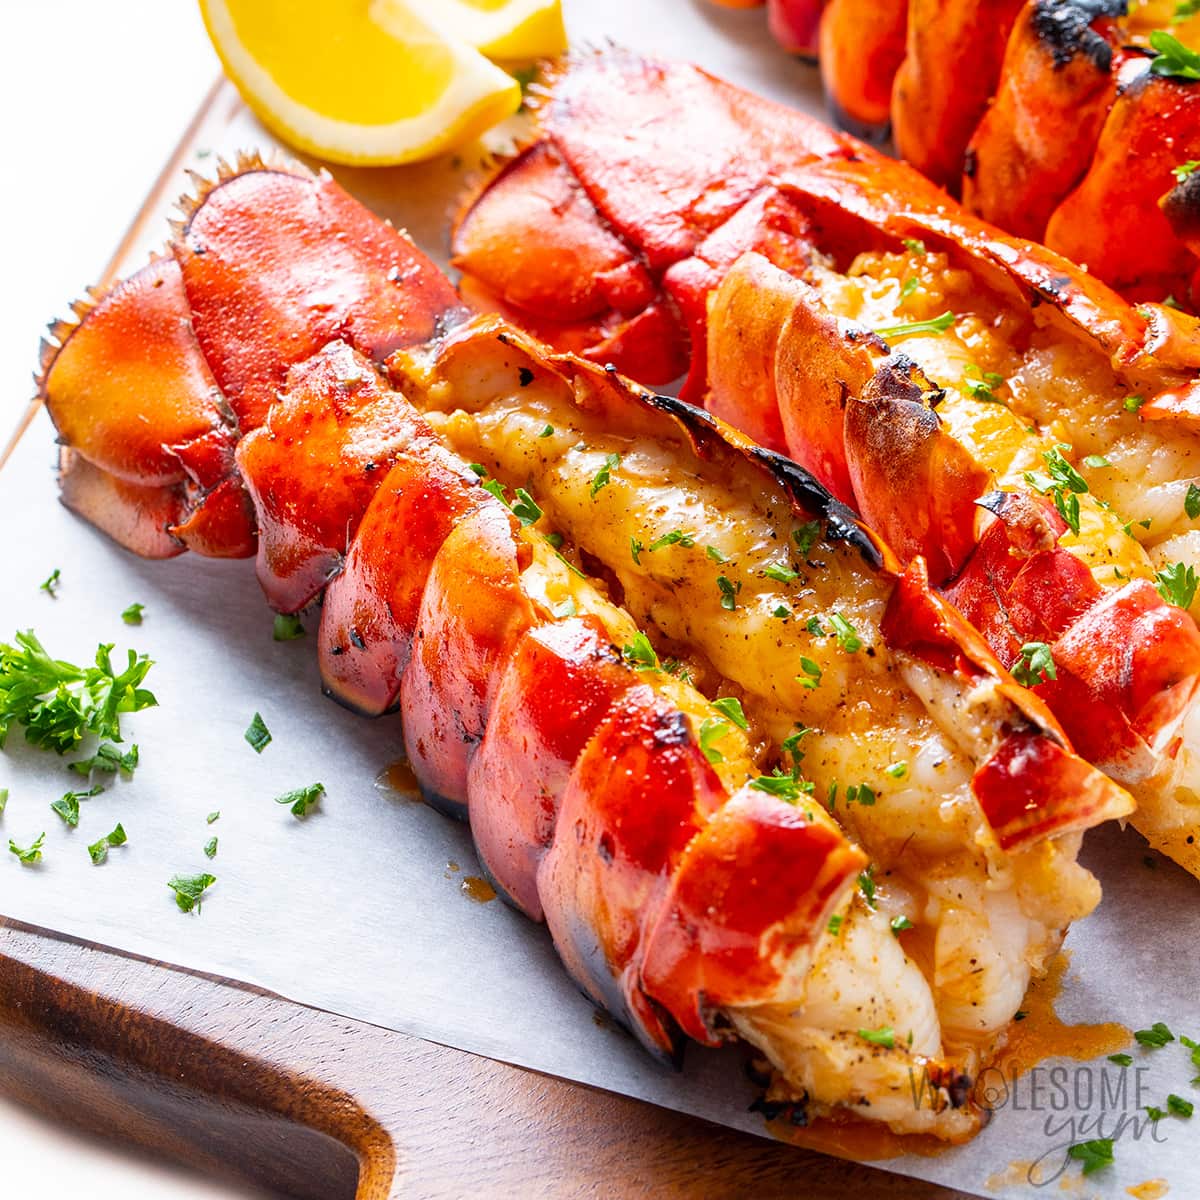 Grilled lobster tail garnished with fresh parsley and lemon wedges.